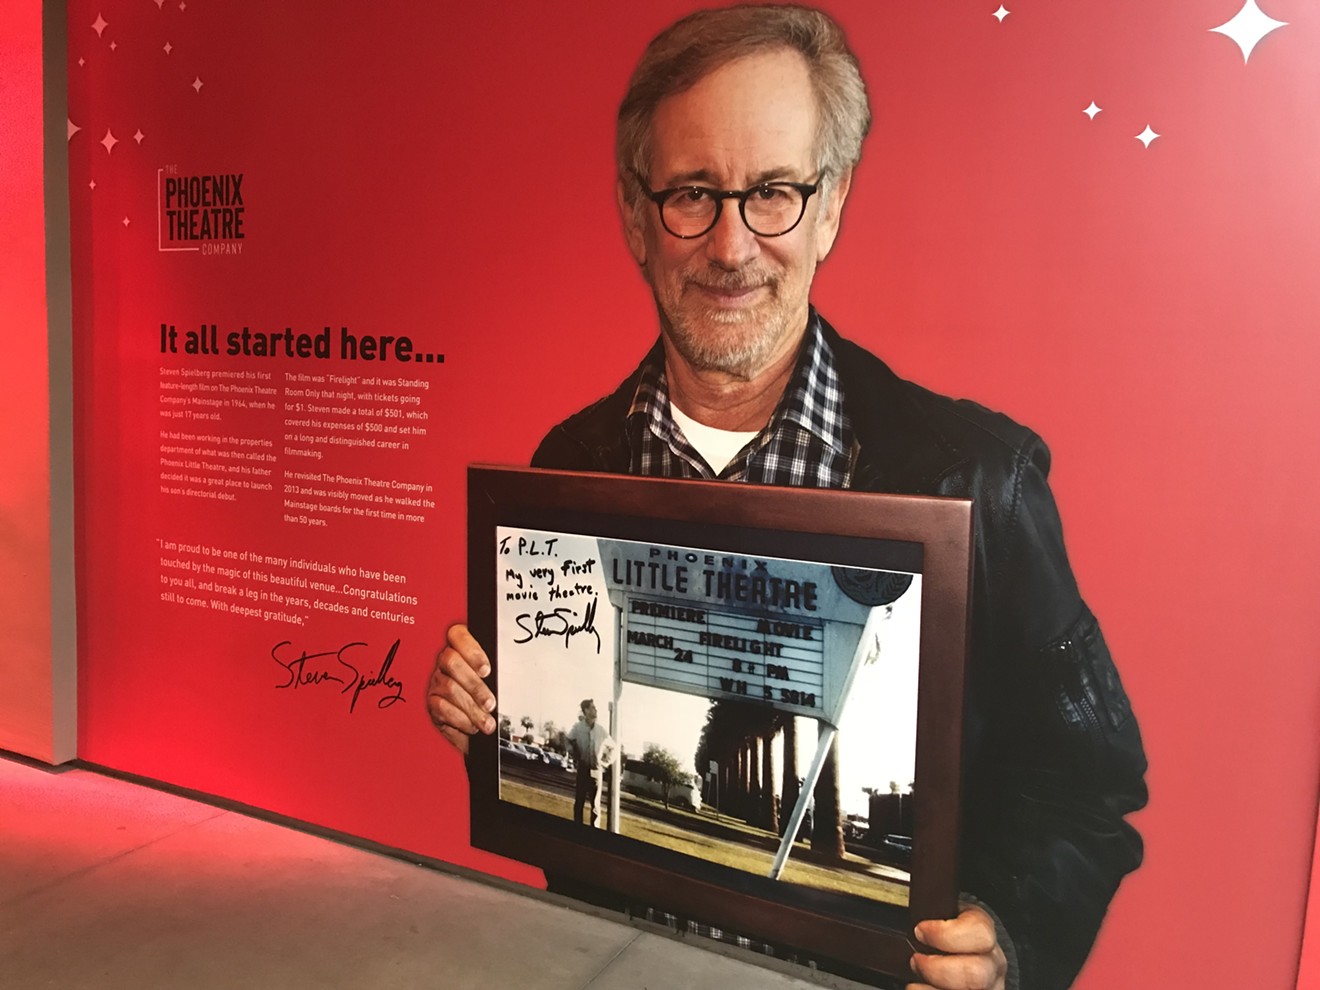 Steven Spielberg has deep roots in Phoenix, seen here celebrated by a temporary display near the box office for Phoenix Theatre Company.